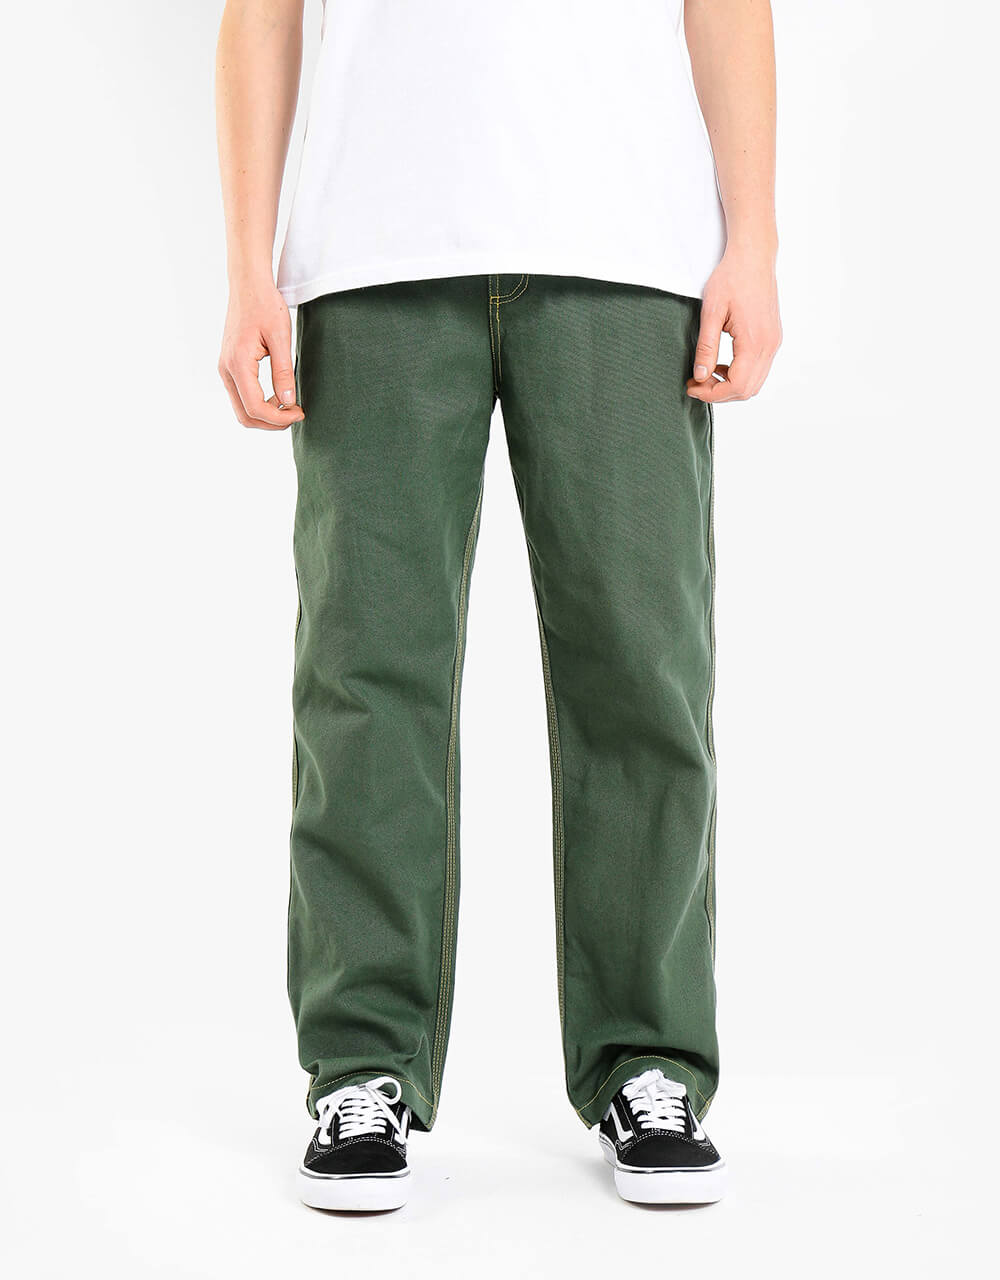 Pass Port Diggers Club Pant - Olive